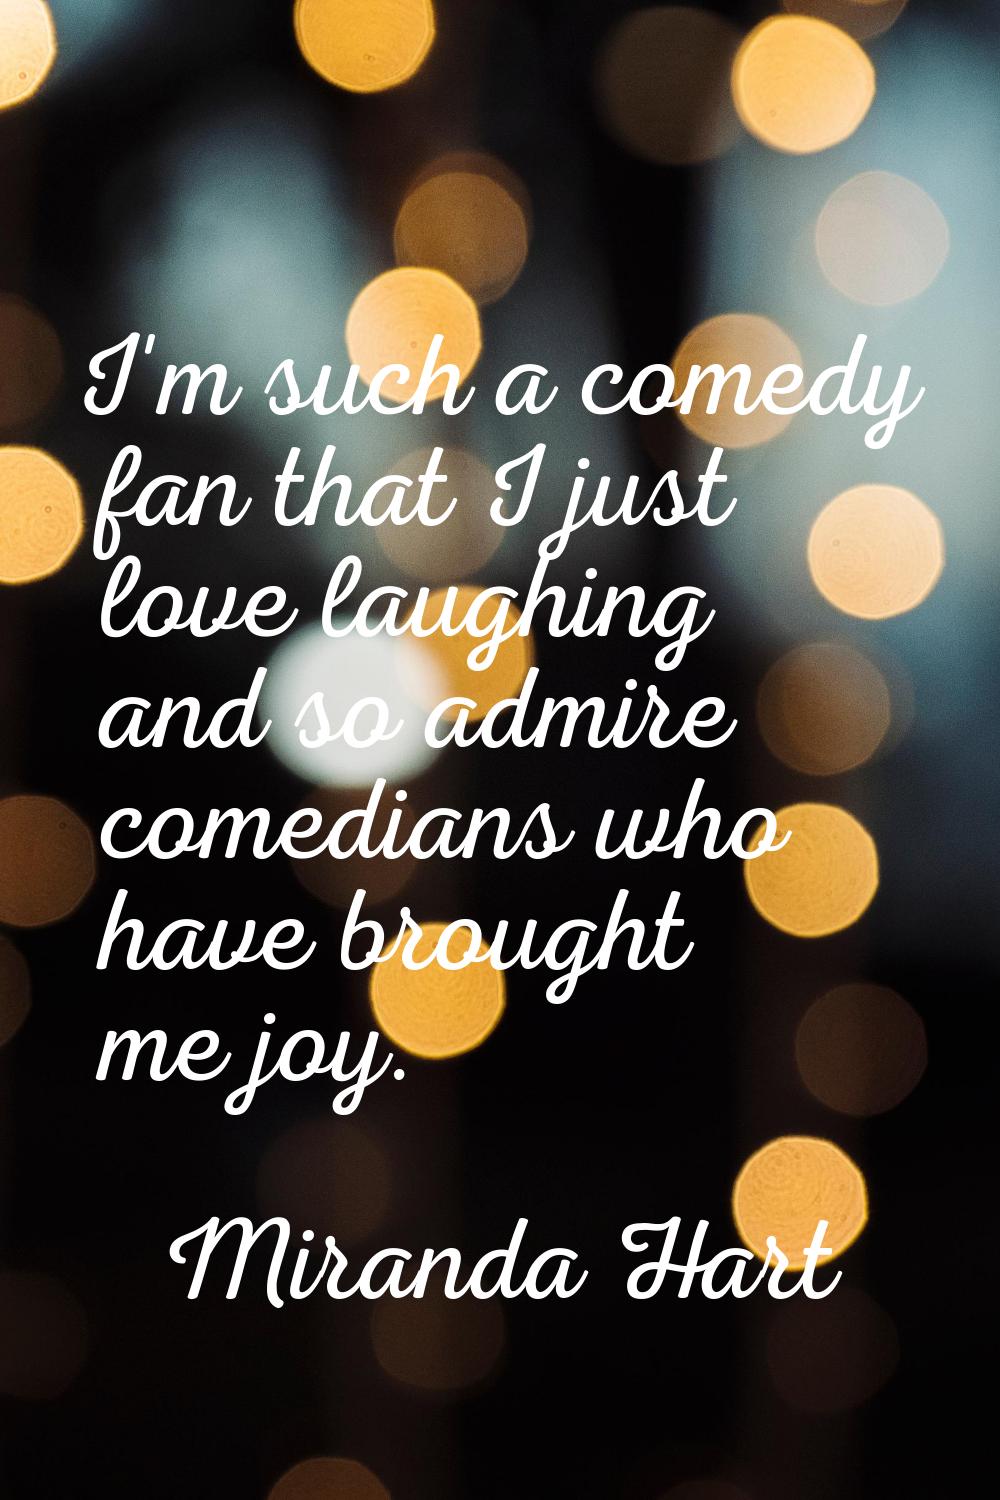 I'm such a comedy fan that I just love laughing and so admire comedians who have brought me joy.